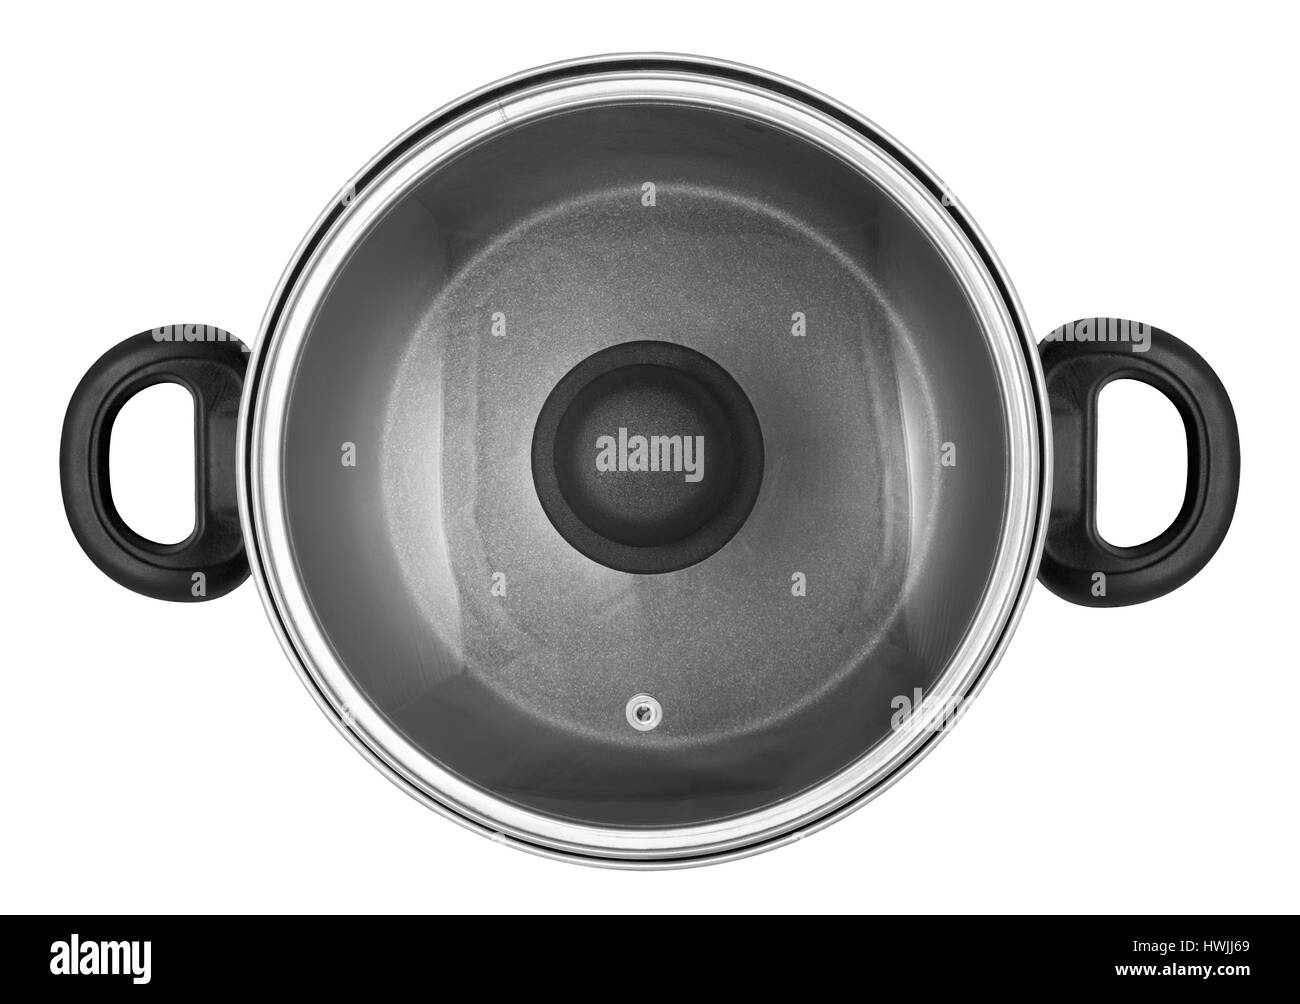 Pan with lid isolated on white background. View from above Stock Photo